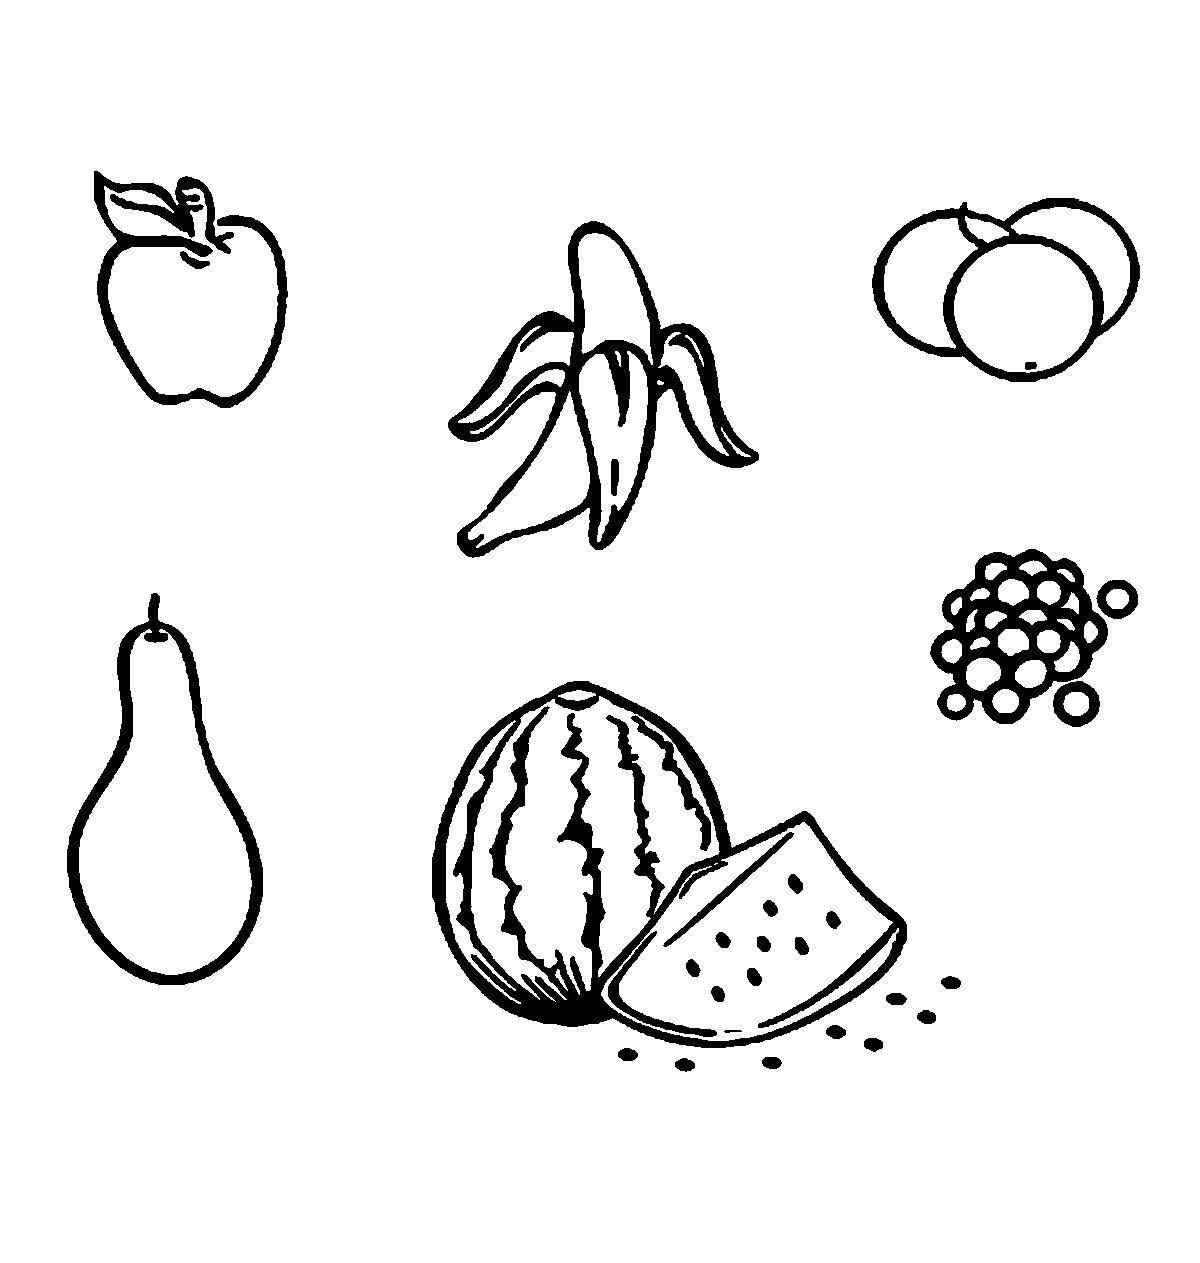 Coloring Fruit. Category berries. Tags:  fruits, berries.